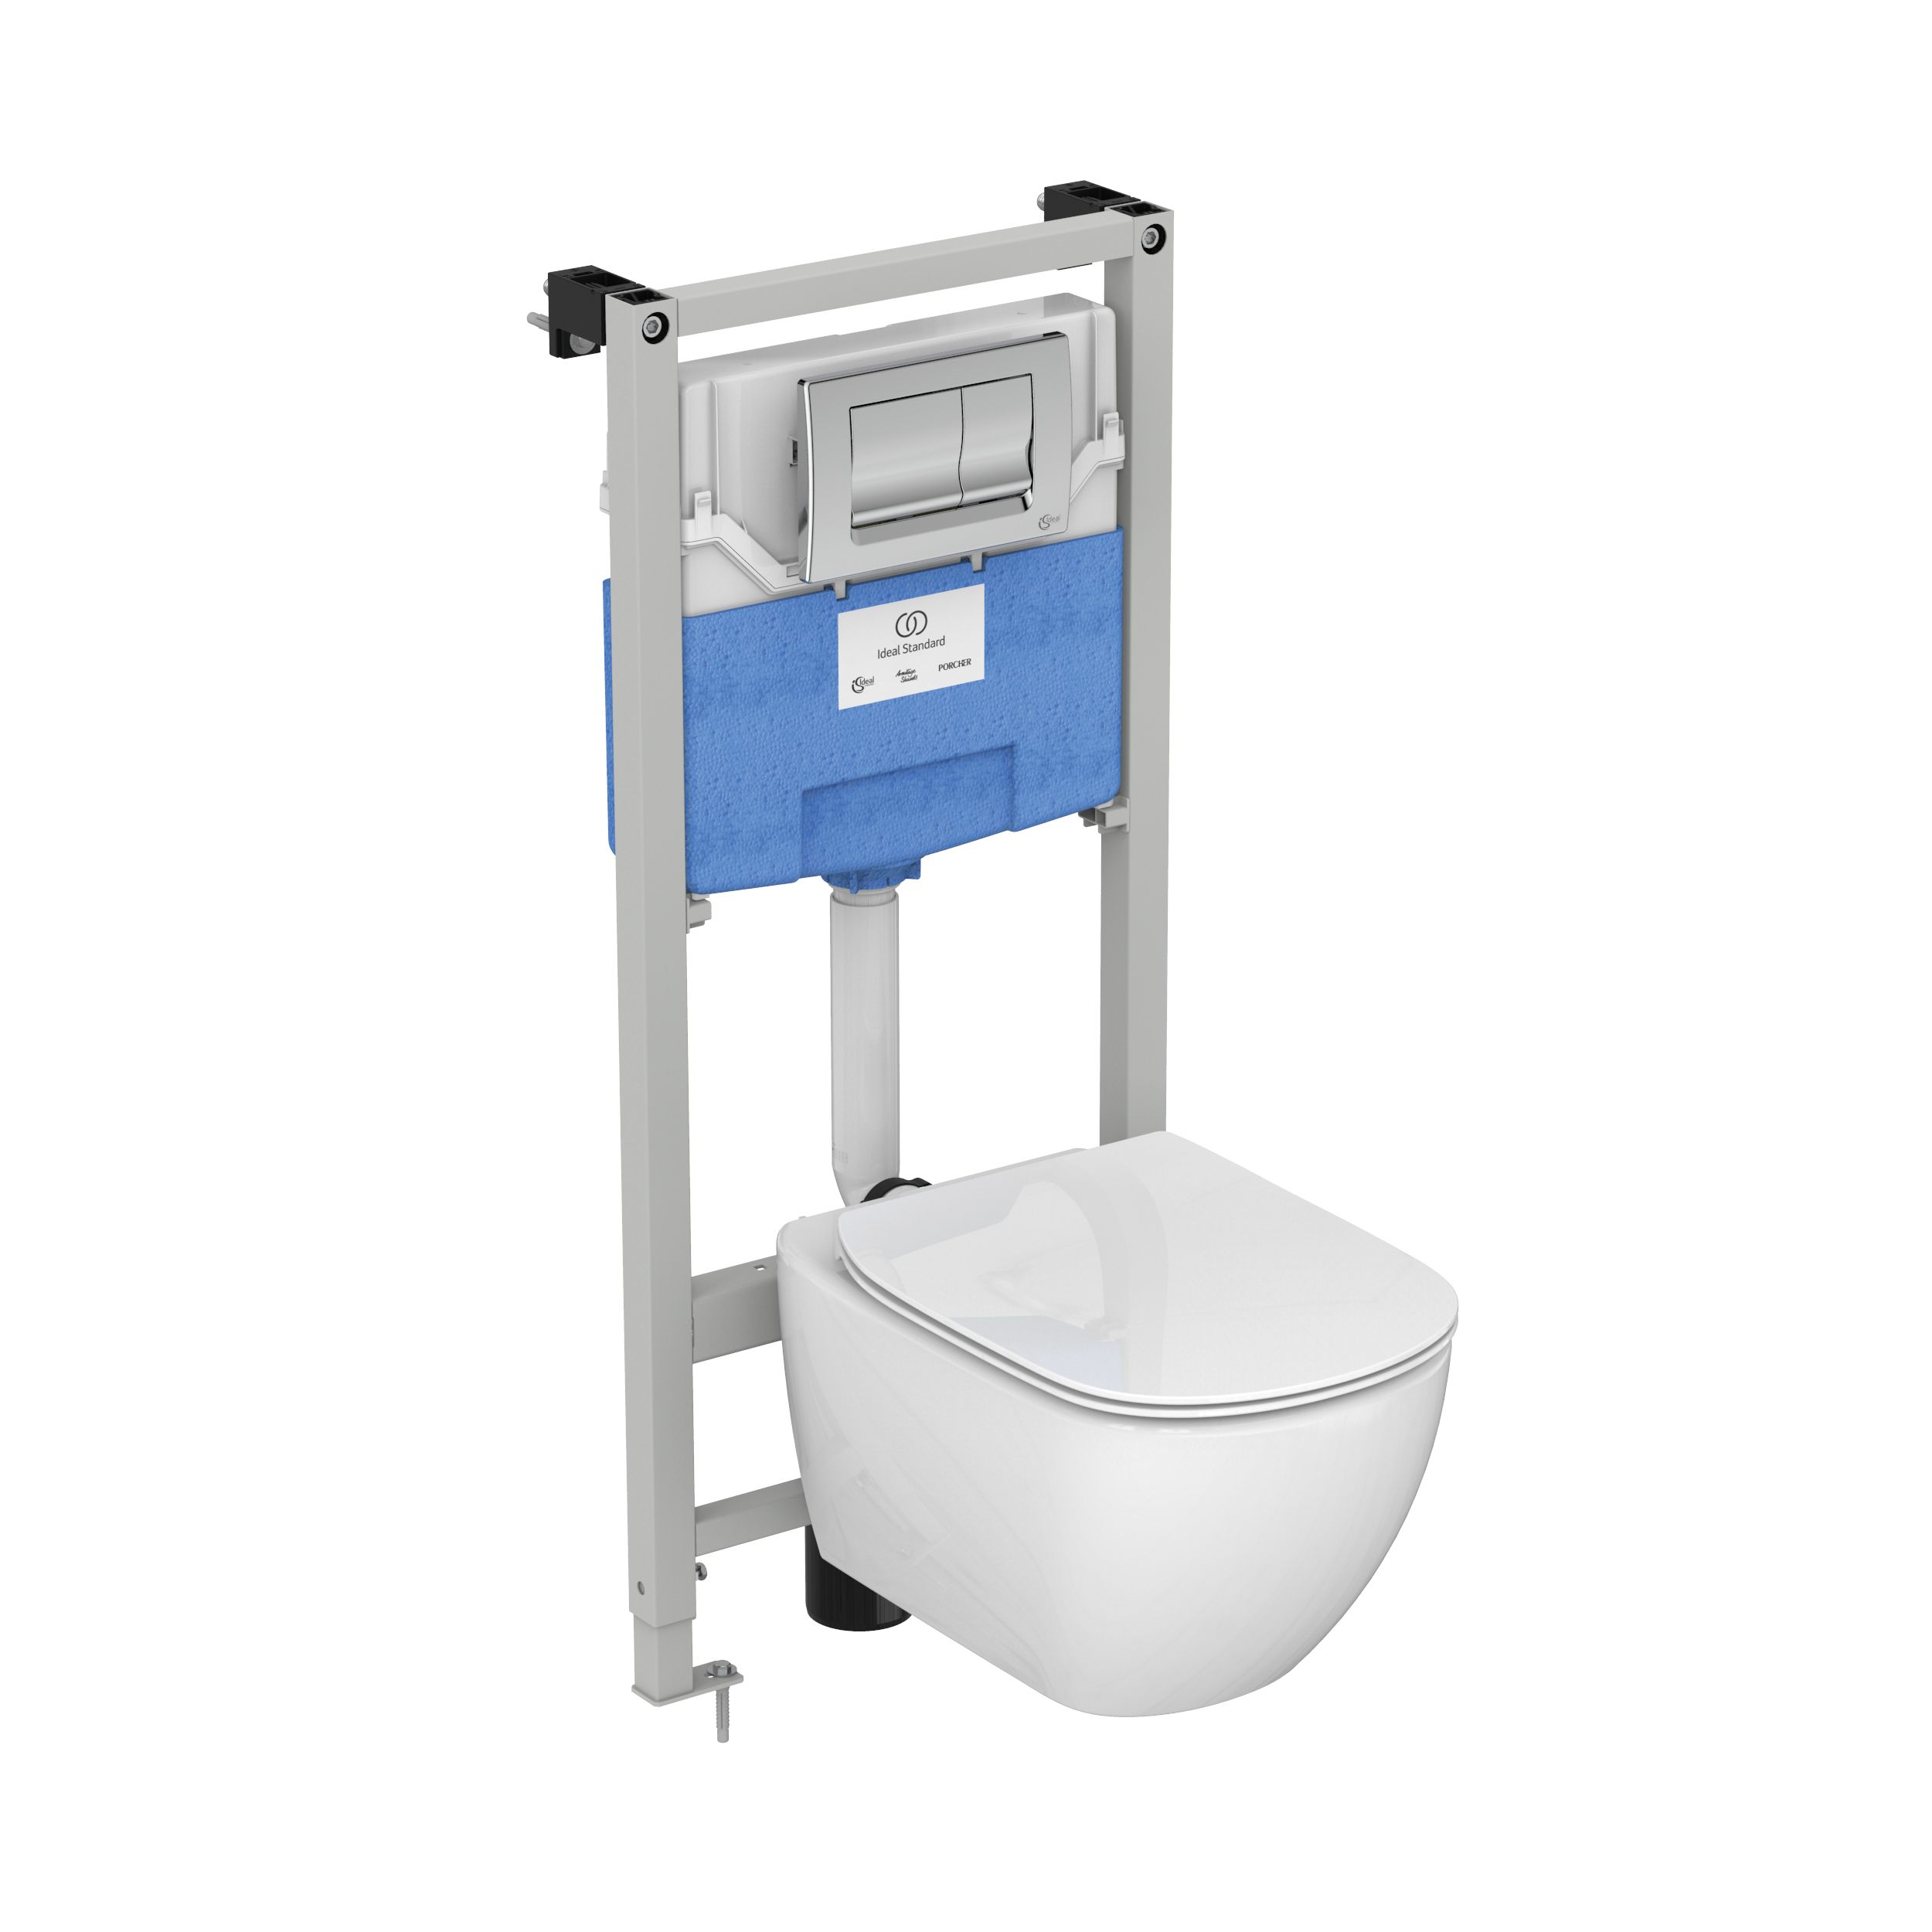 Ideal Standard ProSys Chrome Concealed Wall-mounted Water-saving Toilet Frame & concealed cistern (H)135cm